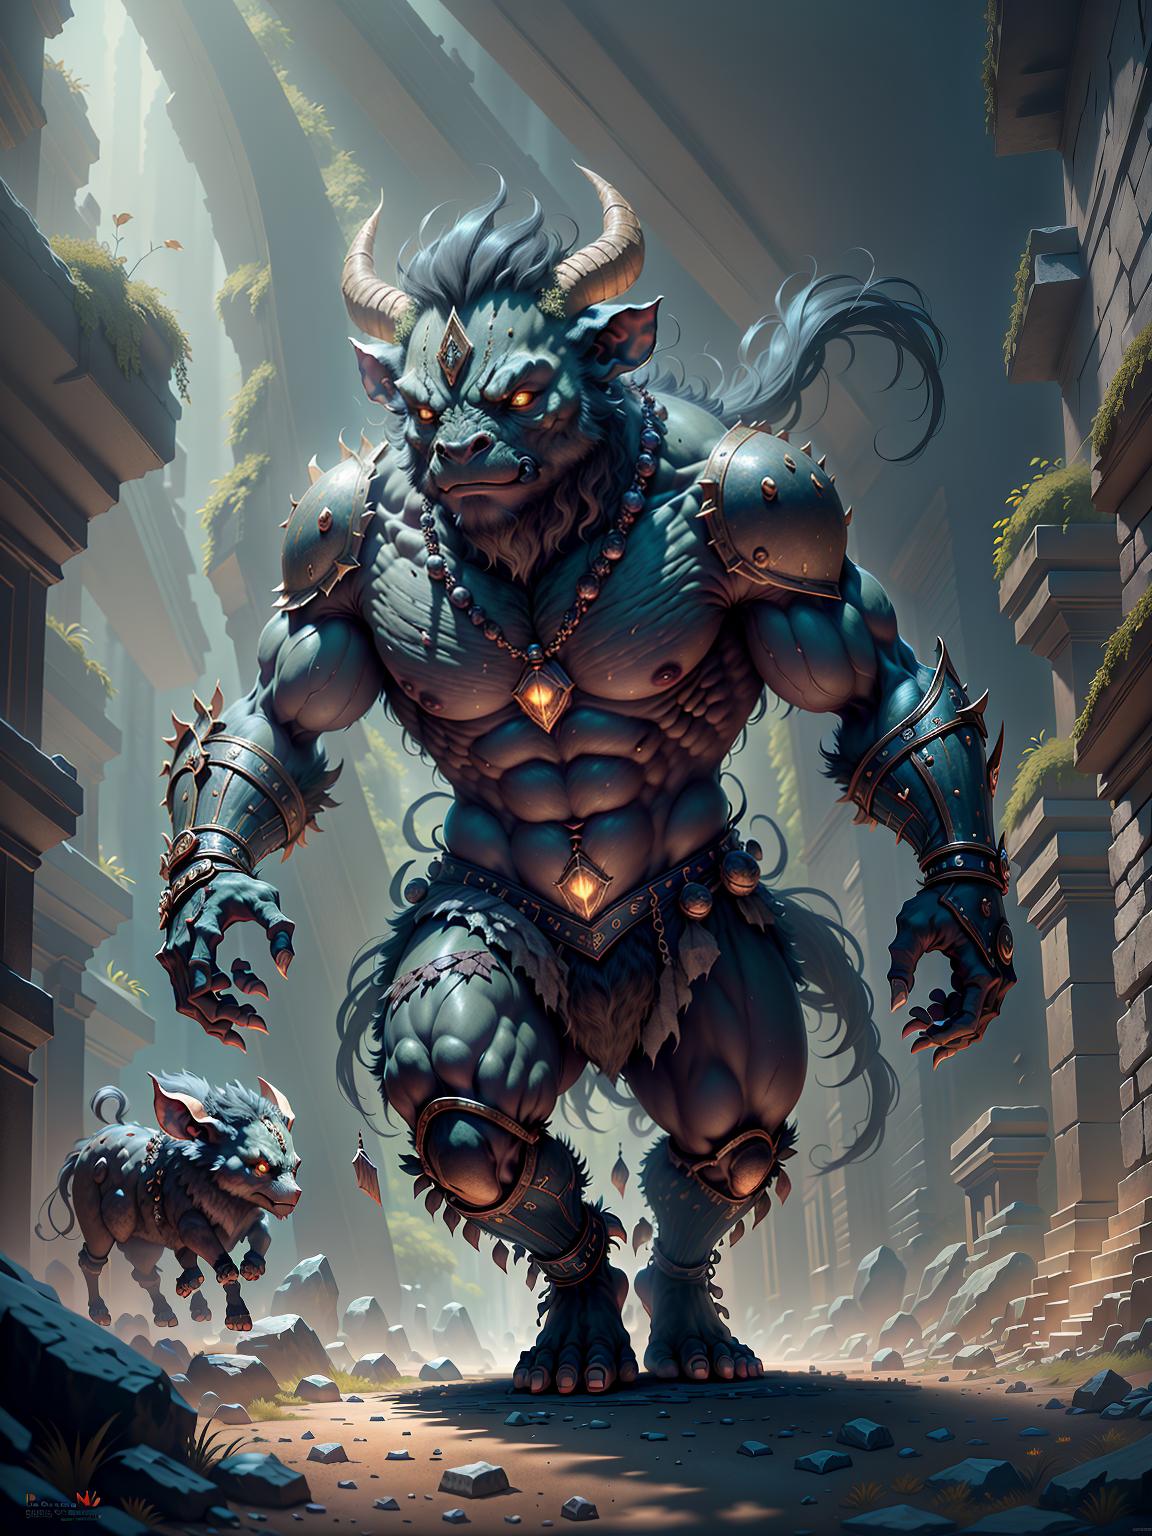  master piece, best quality, ultra detailed, highres, 4k.8k, Minotaur Warrior, Engaging in a fierce battle, Fierce and determined, BREAK A powerful Minotaur warrior on a quest to prove his strength and honor., Ancient Greek ruins, Broken columns, ancient weapons, and cracked stone pedestals, BREAK Tense and foreboding, Dust particles floating in the air, dramatic lighting casting deep shadows, creature00d,Cu73Cre4ture